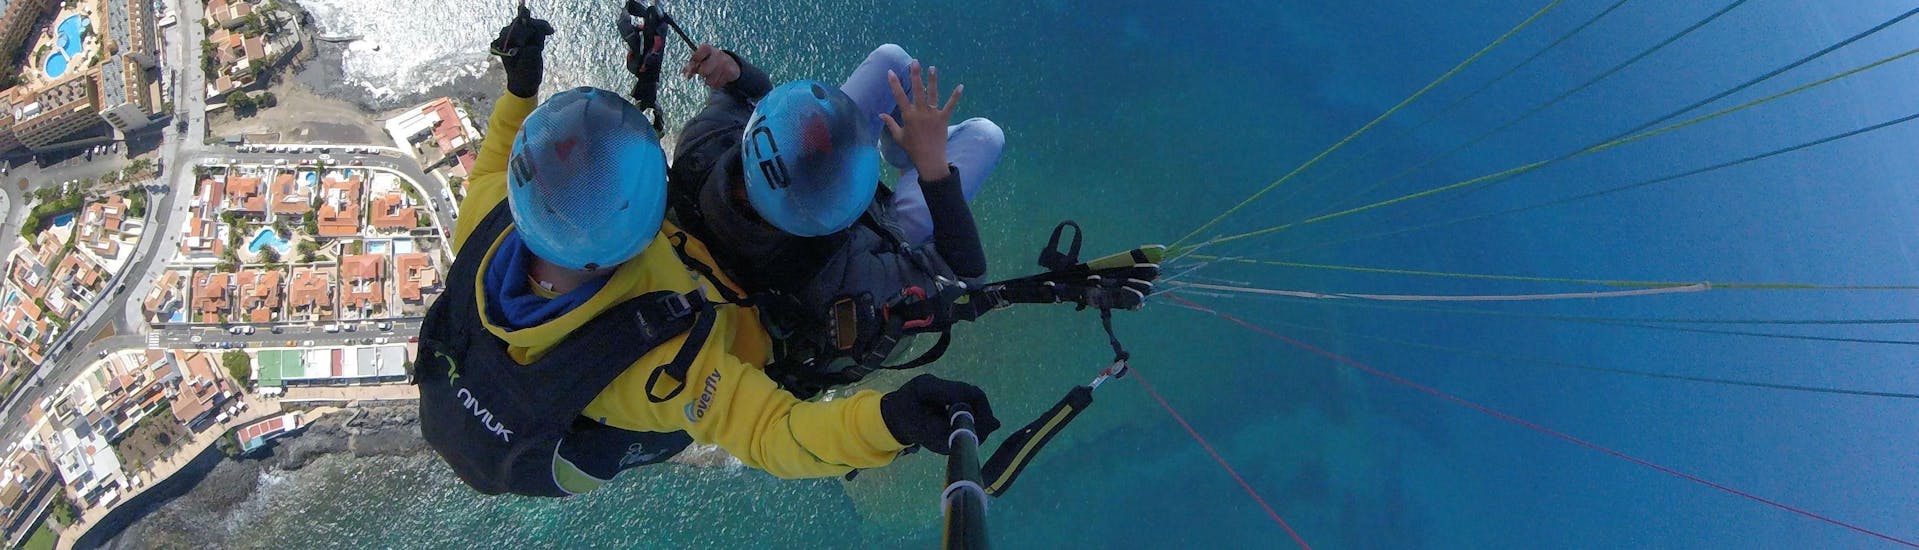 Tandem Paragliding in Tenerife - Thermic.